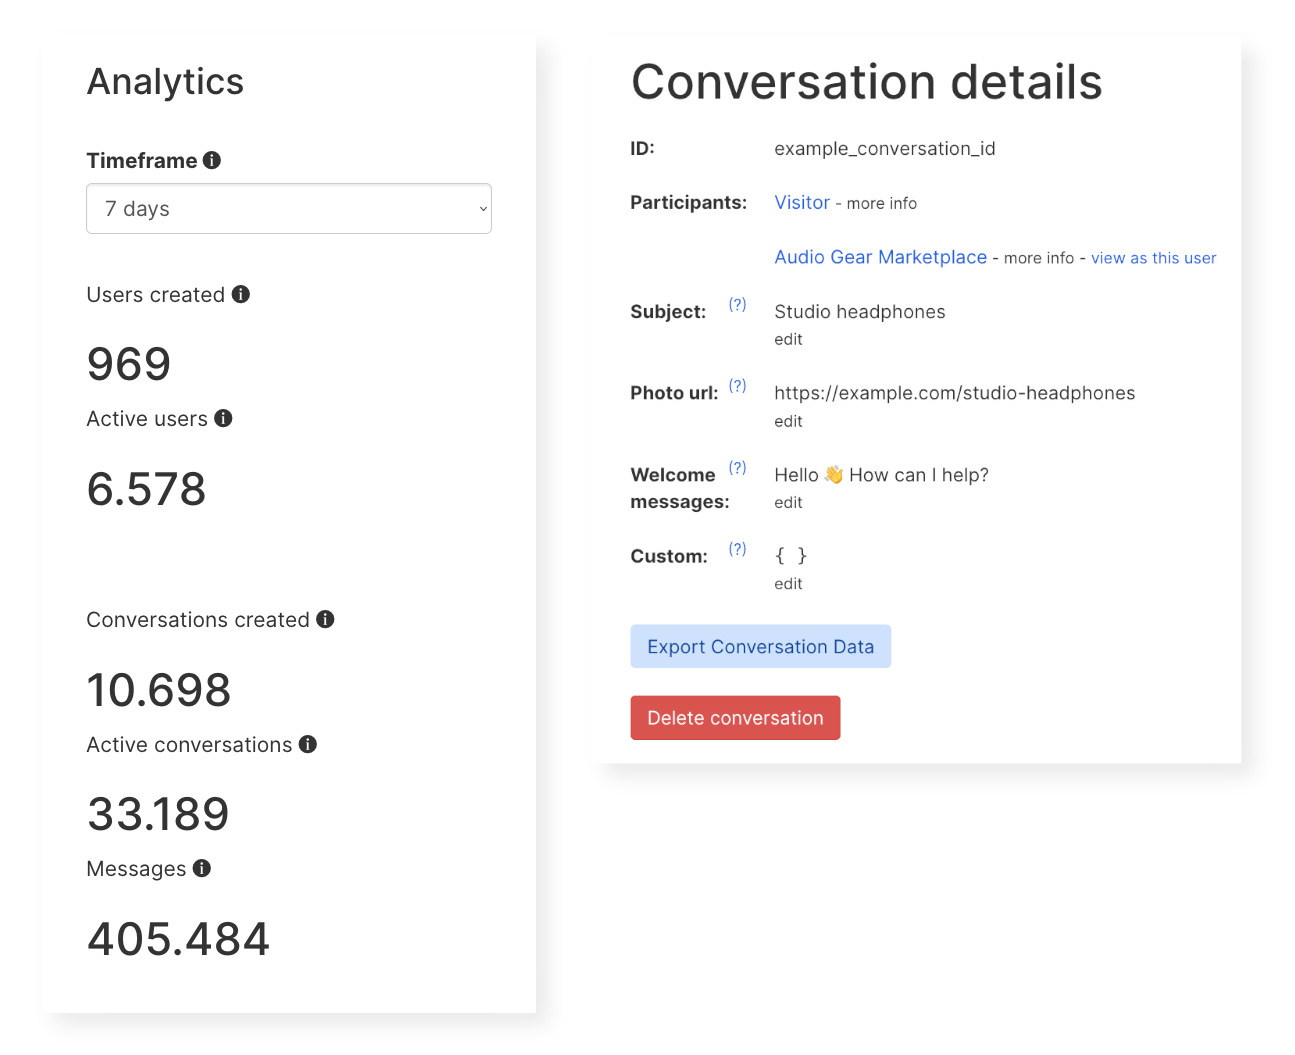 Two overviews from the monitoring dashboard. On the left an overview with the heading ‘Analytics’, with information on the number of users created, active users, the number of conversations created, active conversations, and the number of messages sent during a 7-day time frame. On the right an overview with the heading ‘Conversation details’ with conversation metadata, including the conversation ID, participants, subject, photo URL, welcome message and custom details for the conversation. At the bottom there is a blue button with ‘Export Conversation Data’, and below that a red button with ‘Delete conversation’.